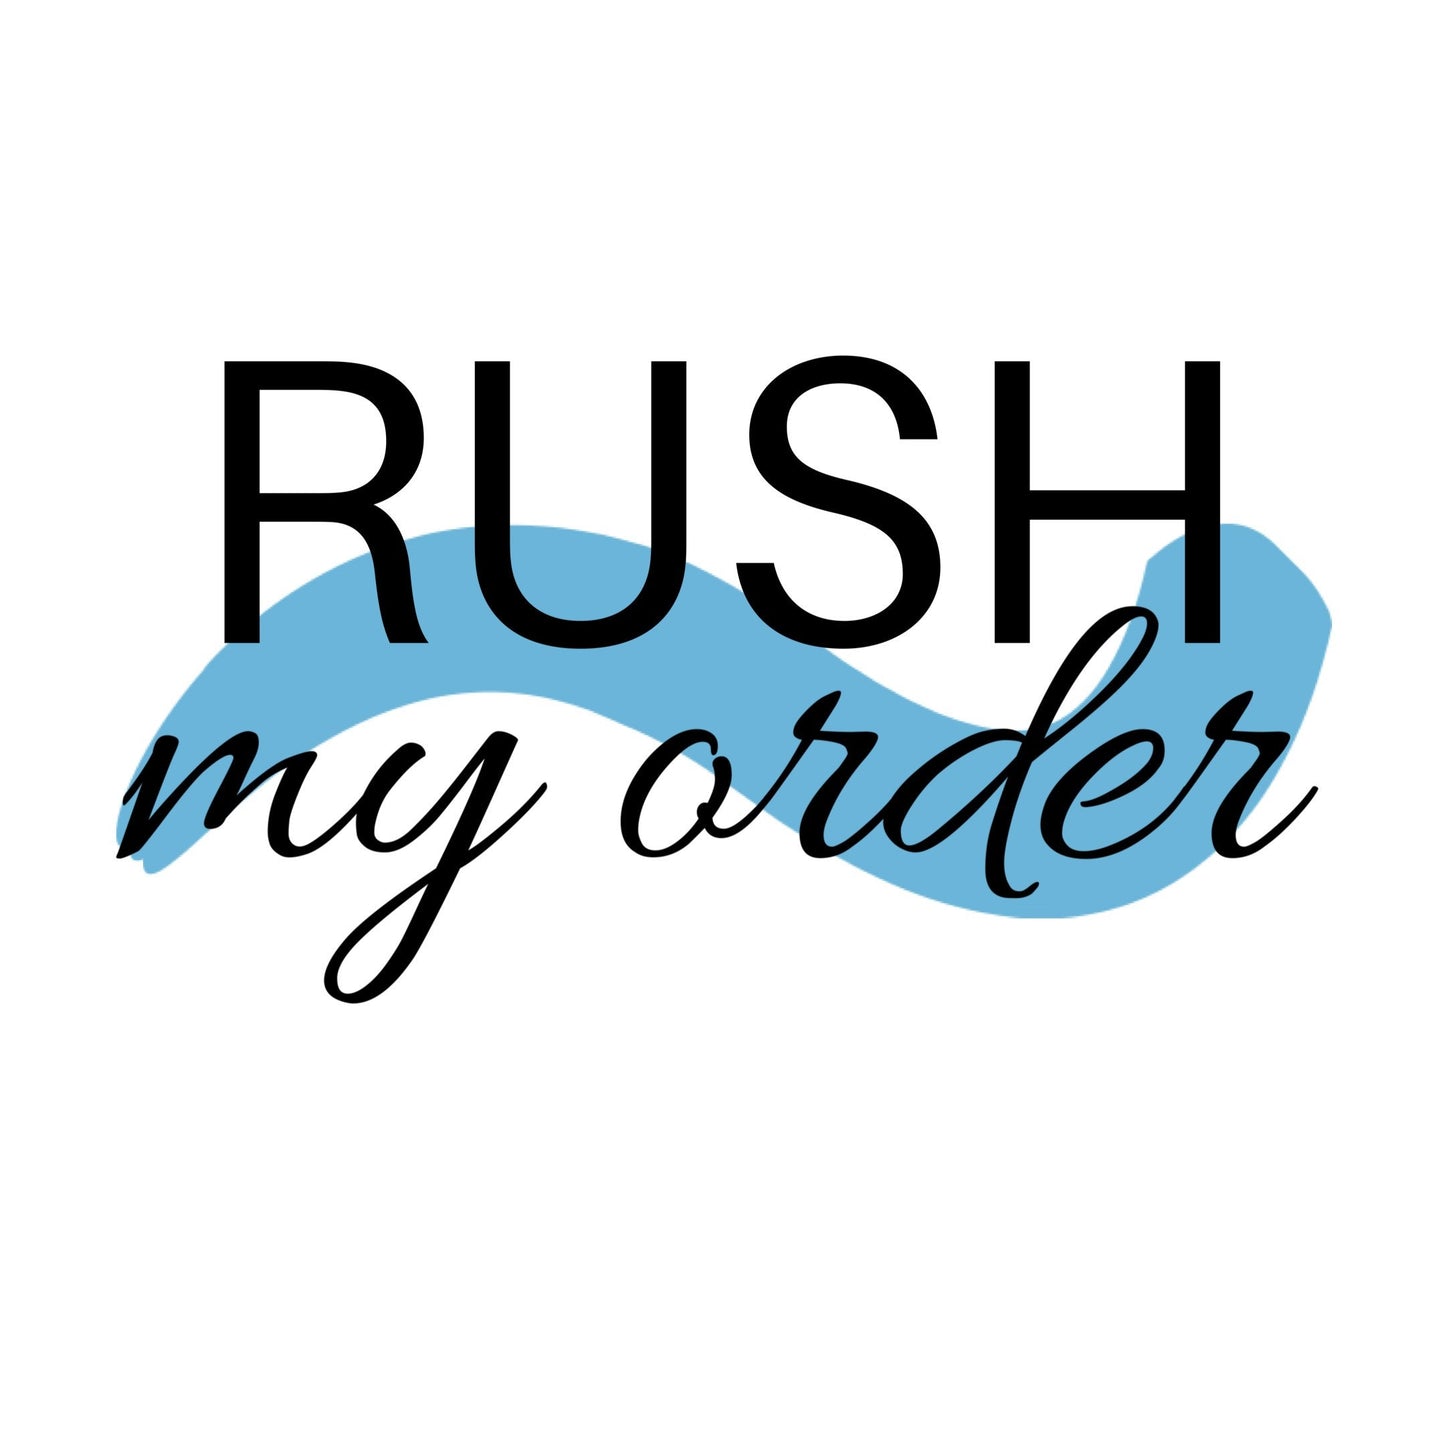 Rush my order, expedite and skip the wait - add to your planner sticker order